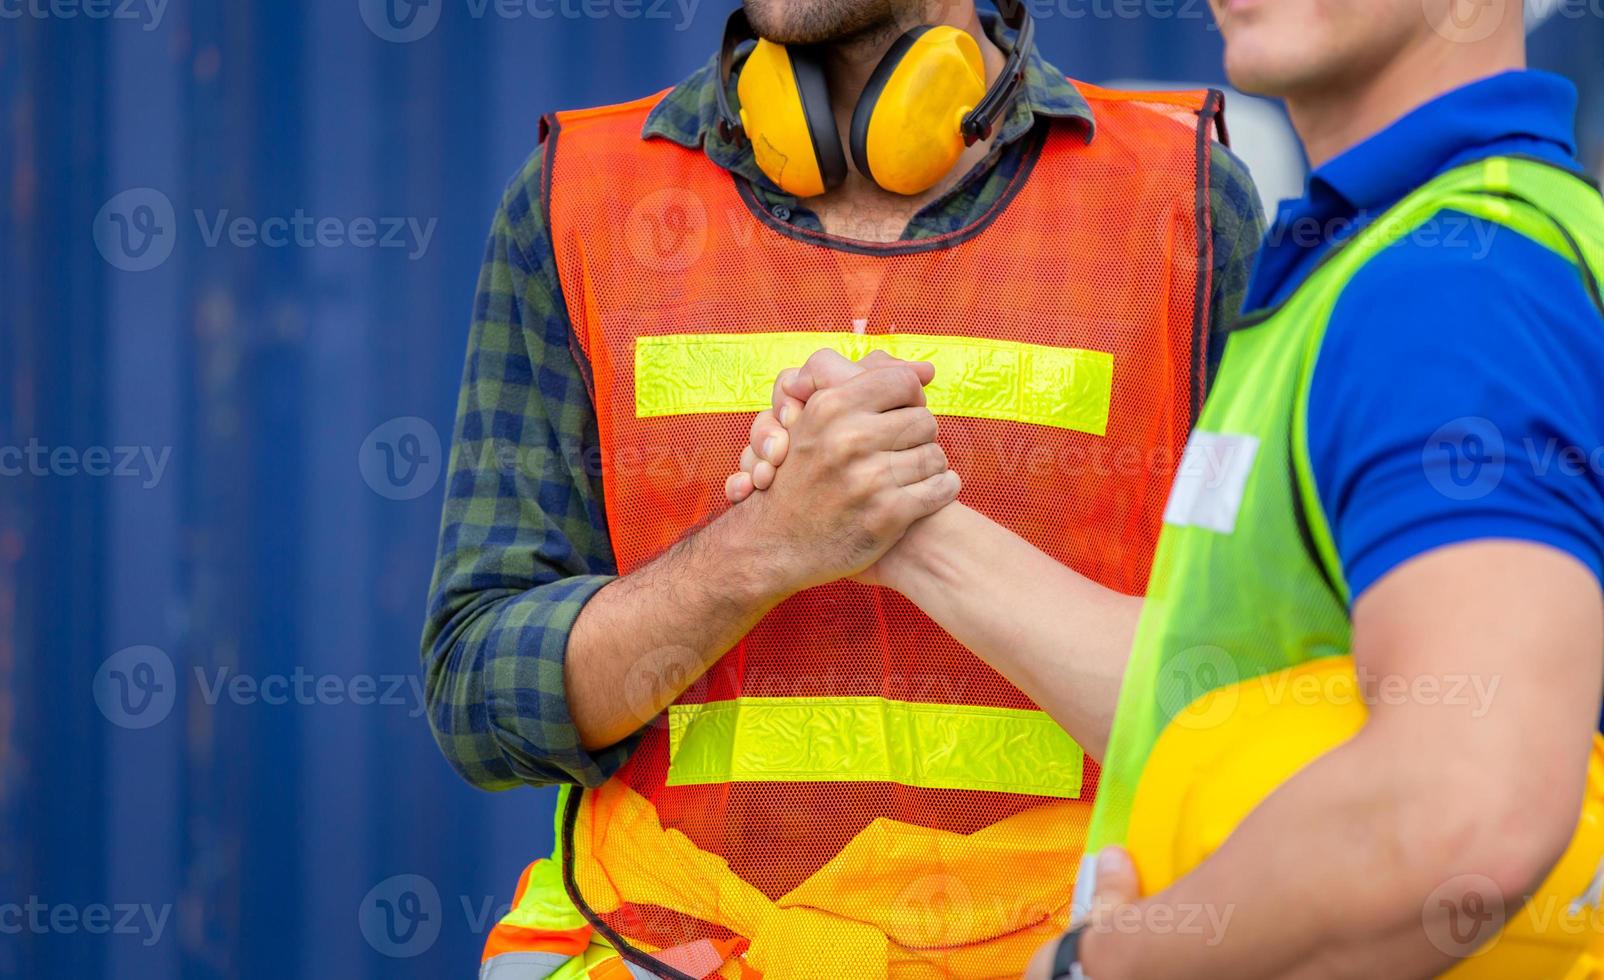 Engineer and worker soul brother handshake, thumb clasp handshake or homie handshake with blurred containers cargo background, Success and Teamwork concept photo